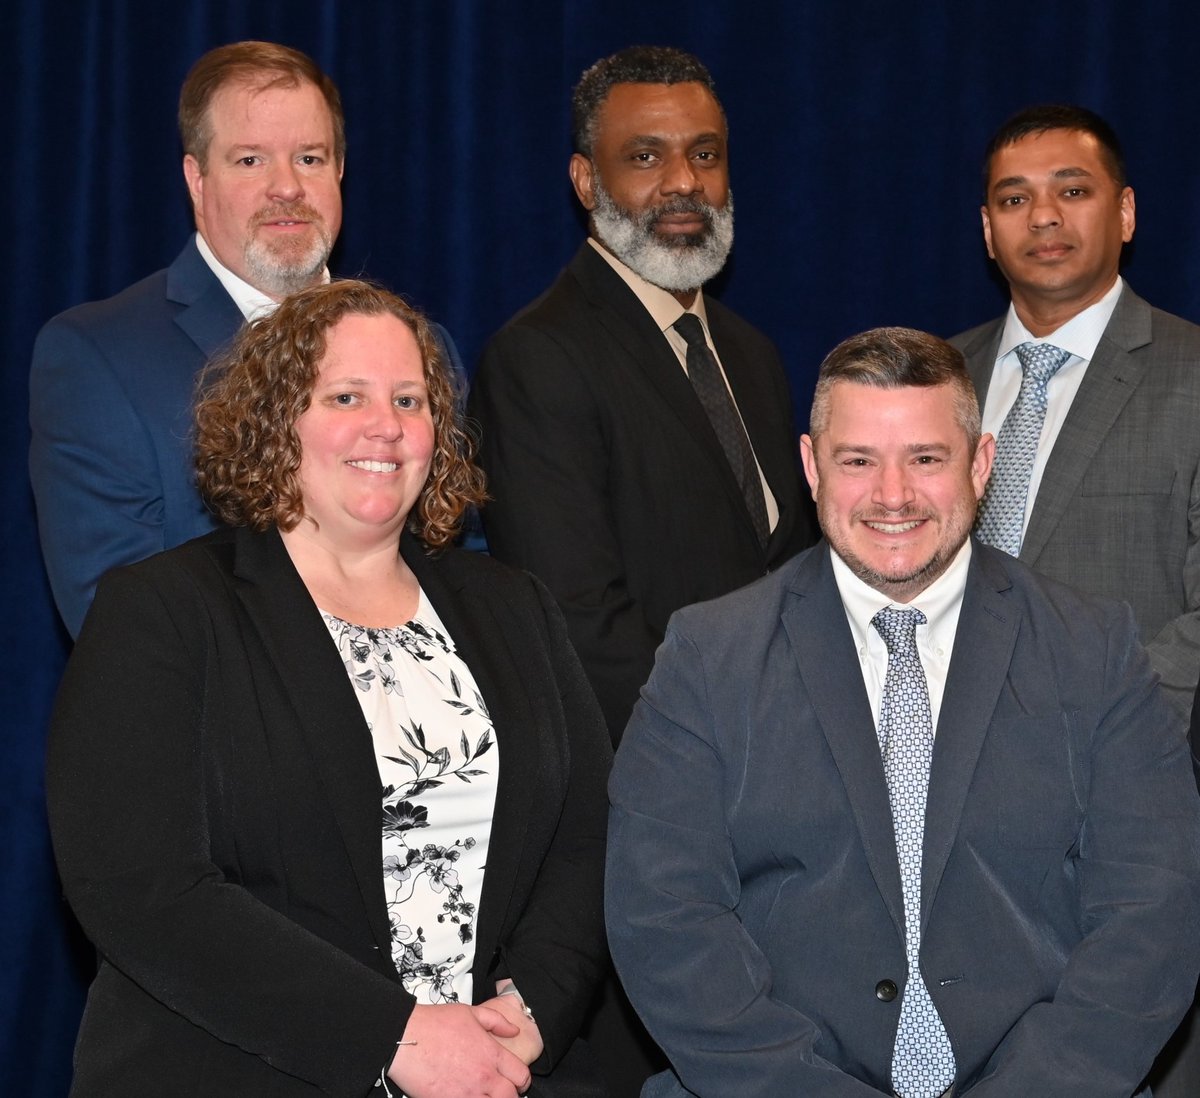 Our Pikesville Precinct's (IST) members are the Balt. Co. Police Foundation's Exceptional Group Performance Award winners for their persistent and exemplary investigative skills in a complex & significant catalytic converter theft investigation. More at: ow.ly/r8U150RrgCu